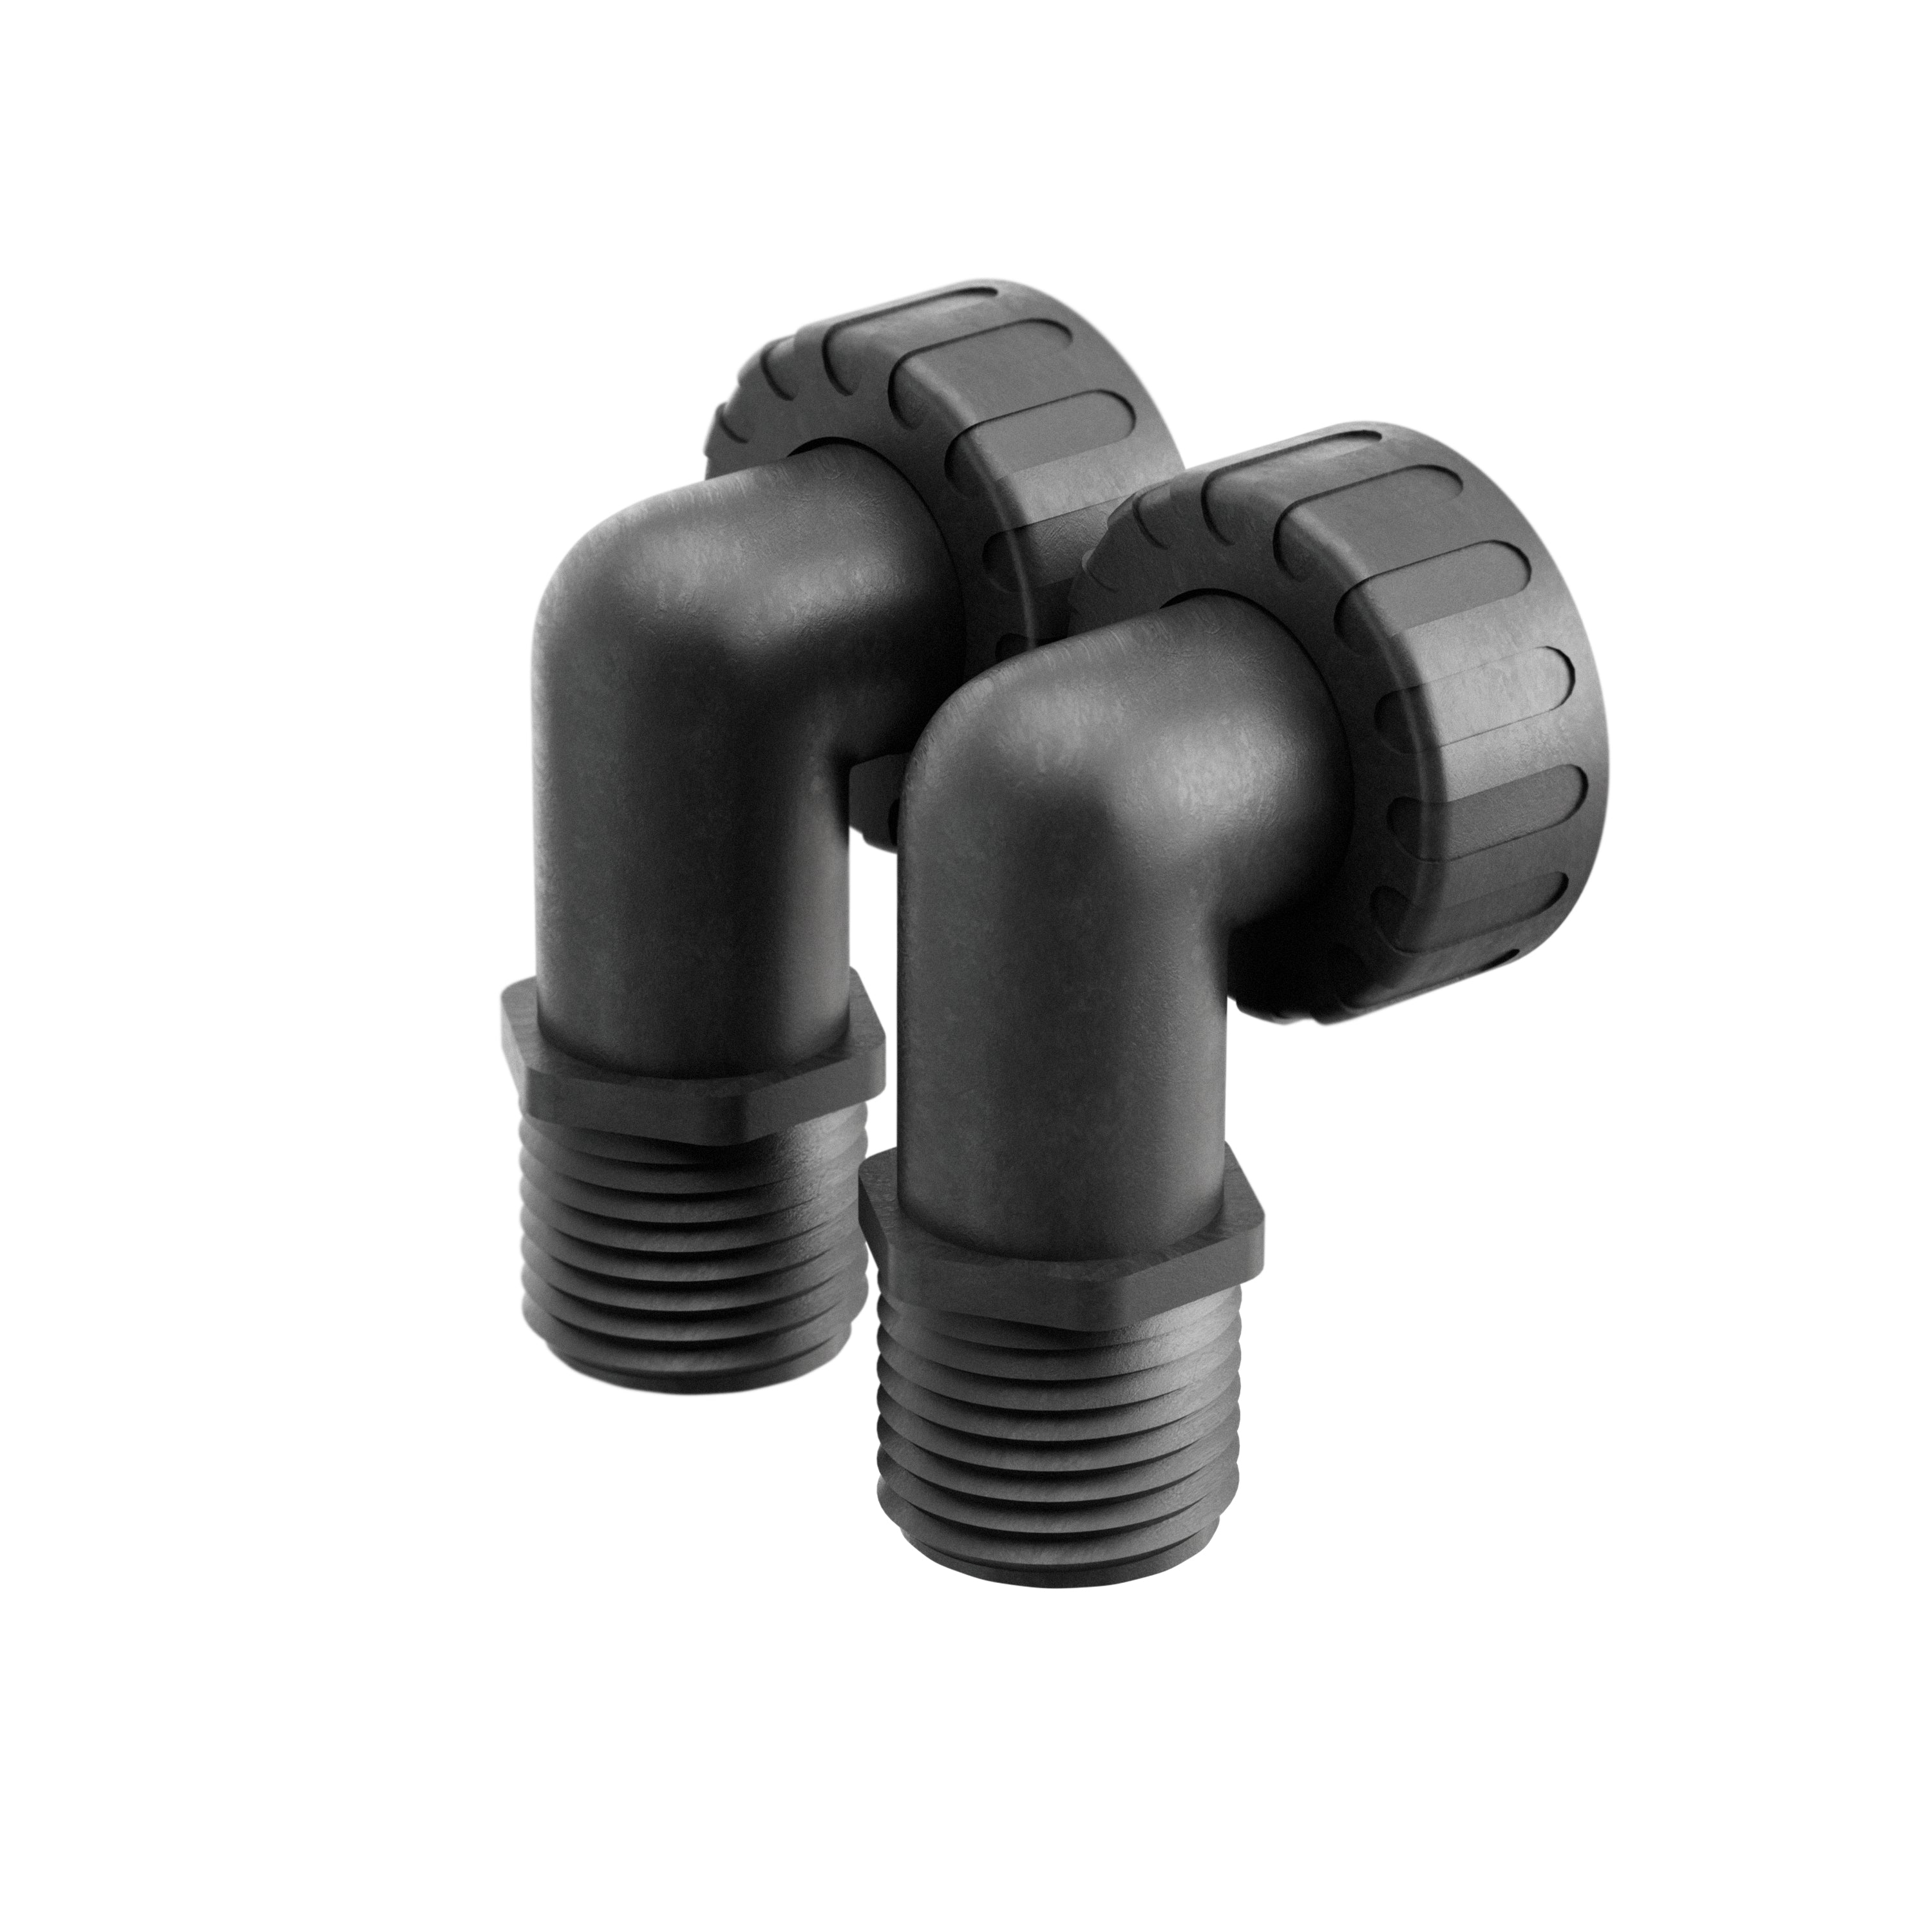 1" NPT Quick Connect Elbow Adapters for Pro+Aqua Bypass Valve